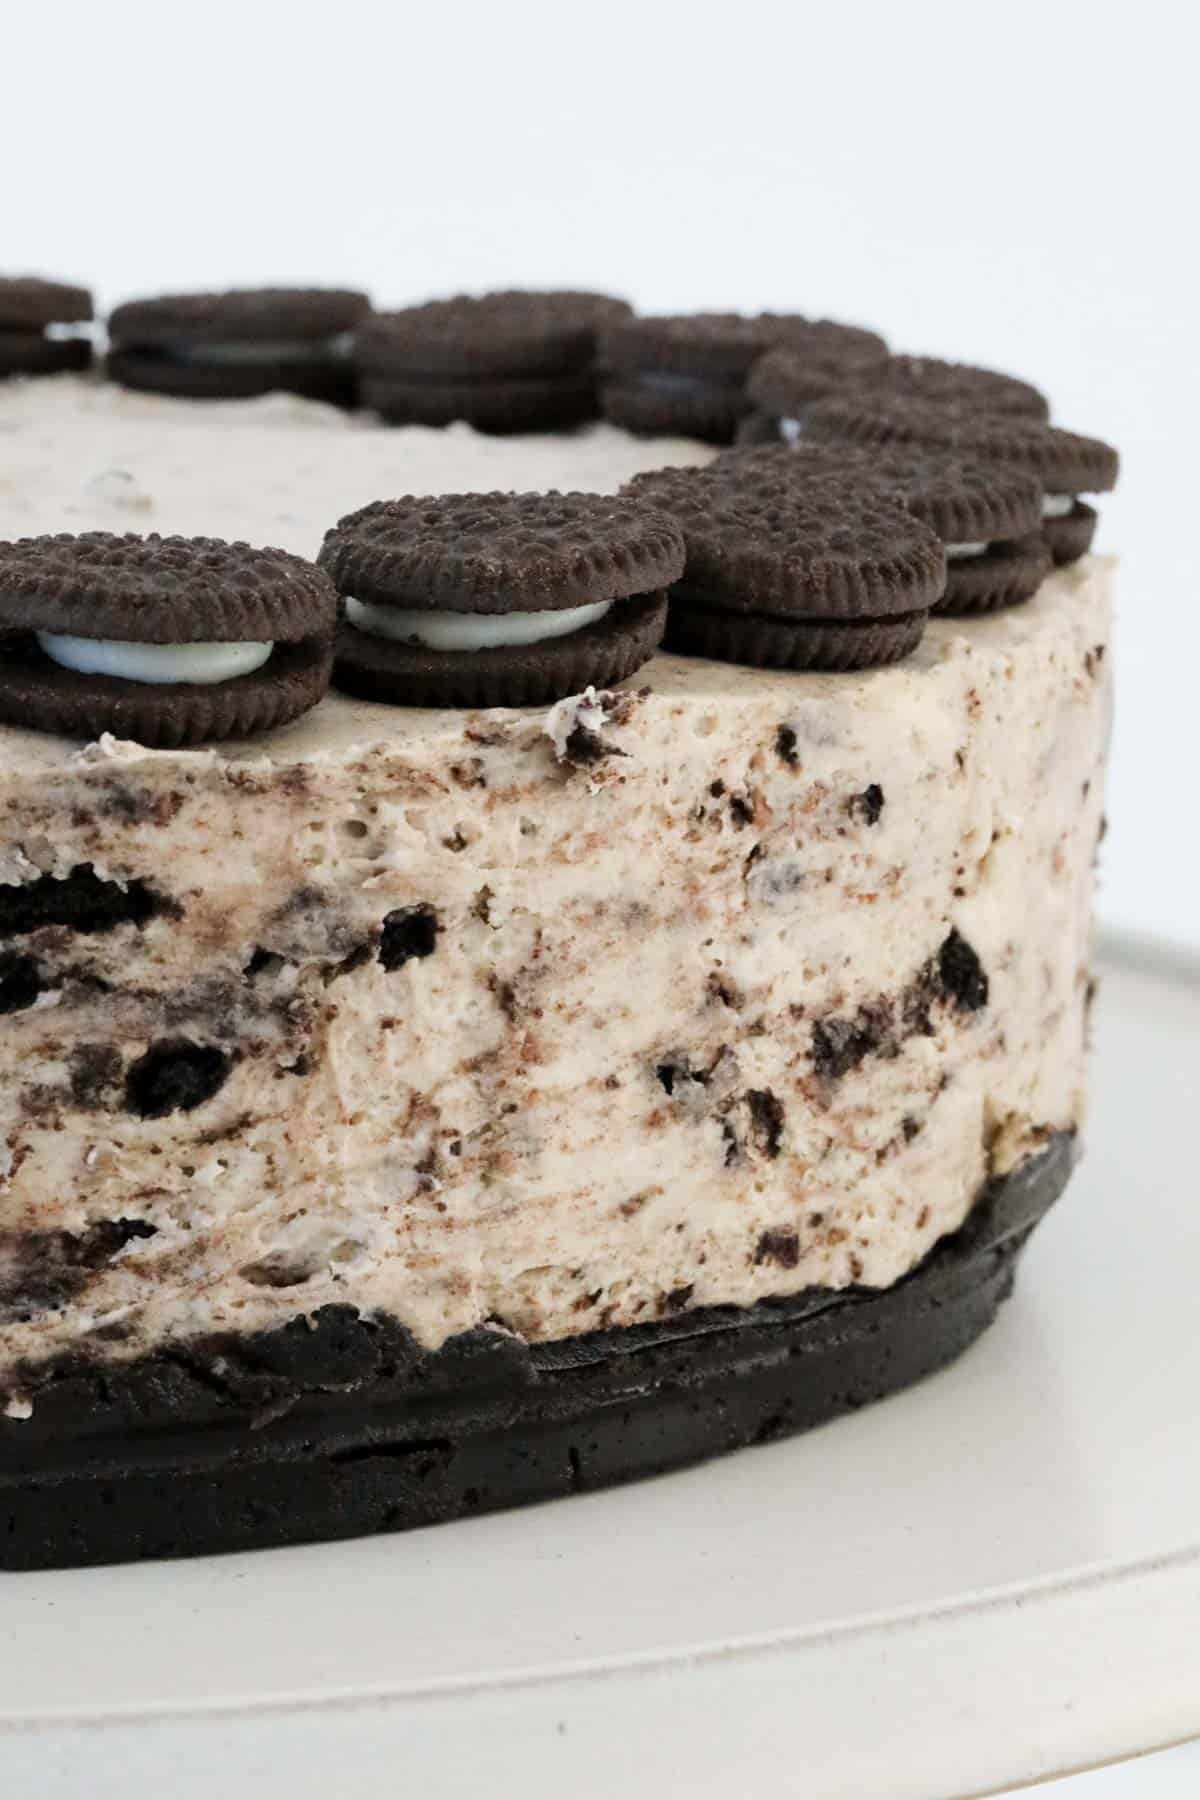 A side view of a cheesecake showing the chocolate biscuit base, the cookies & cream filling, and mini Oreo's decorating the top.